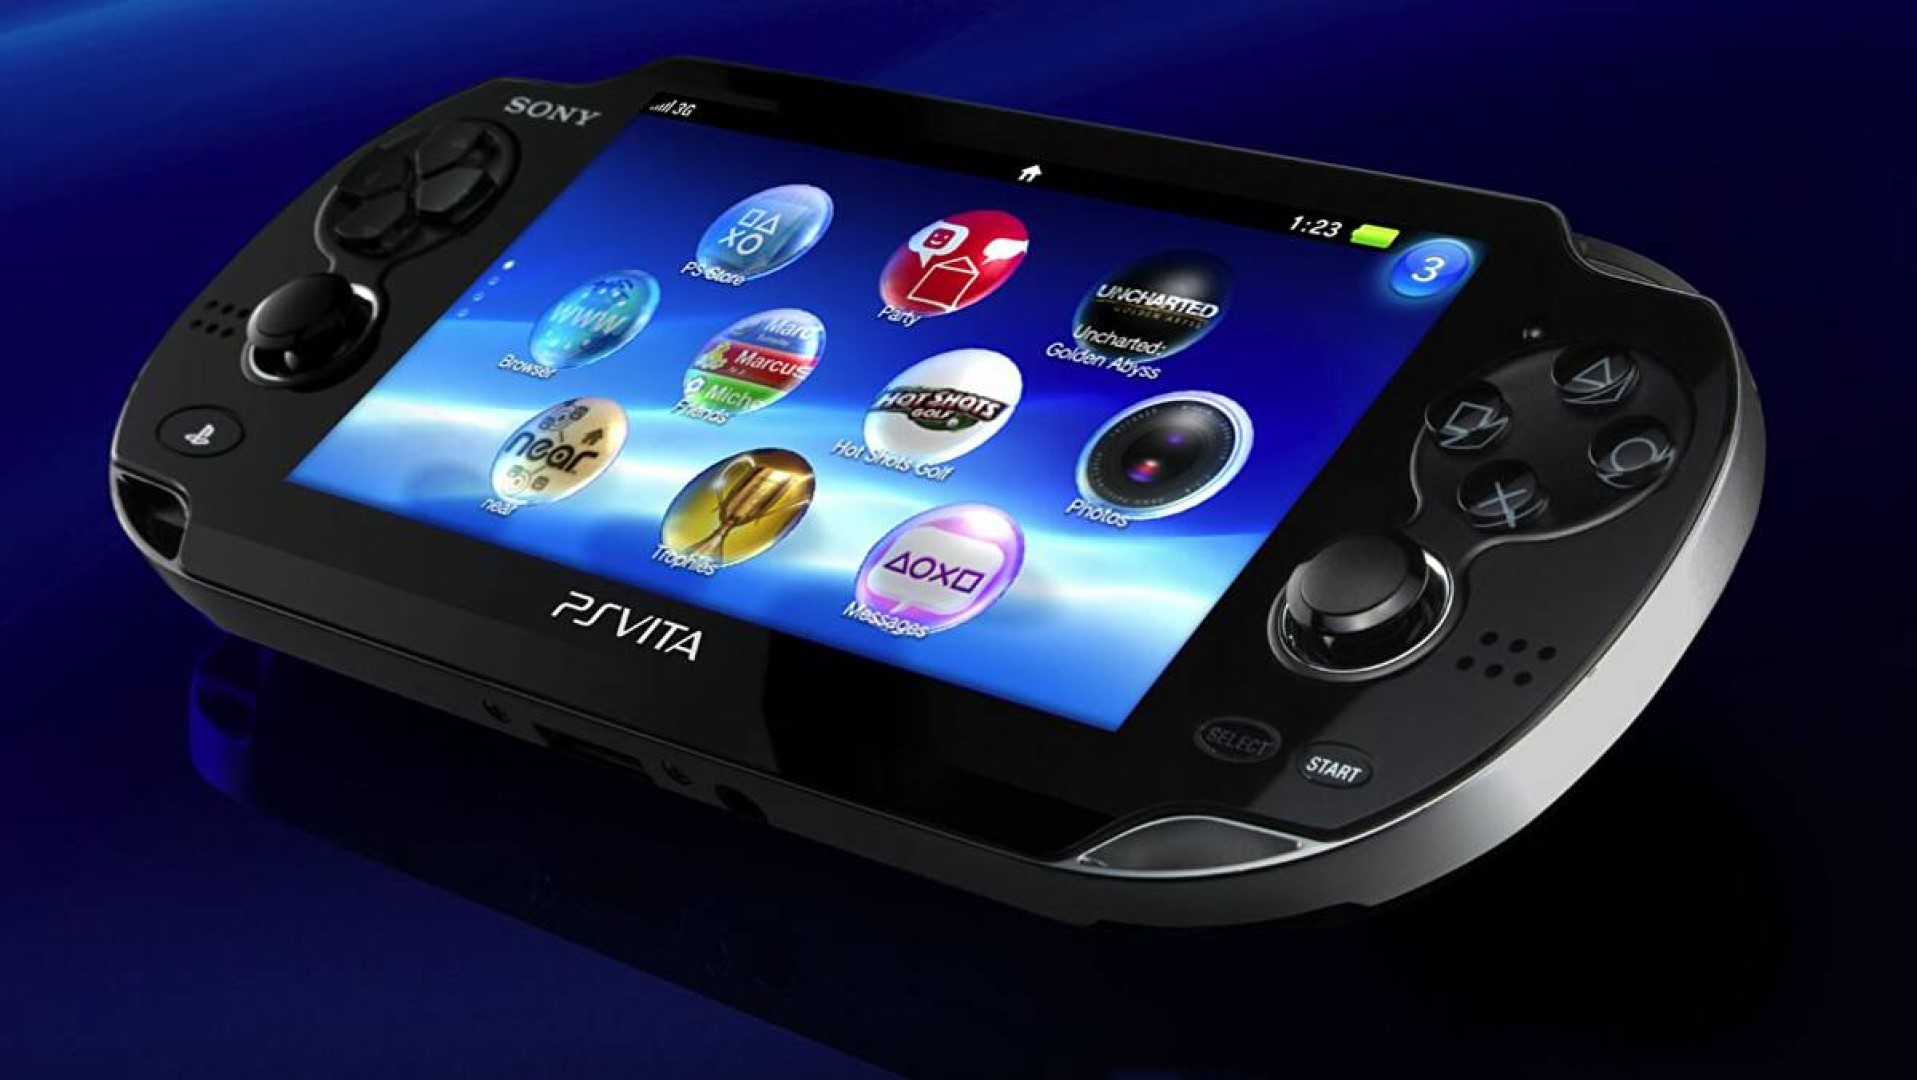 PlayStation Handheld is Currently Planned to Release in November